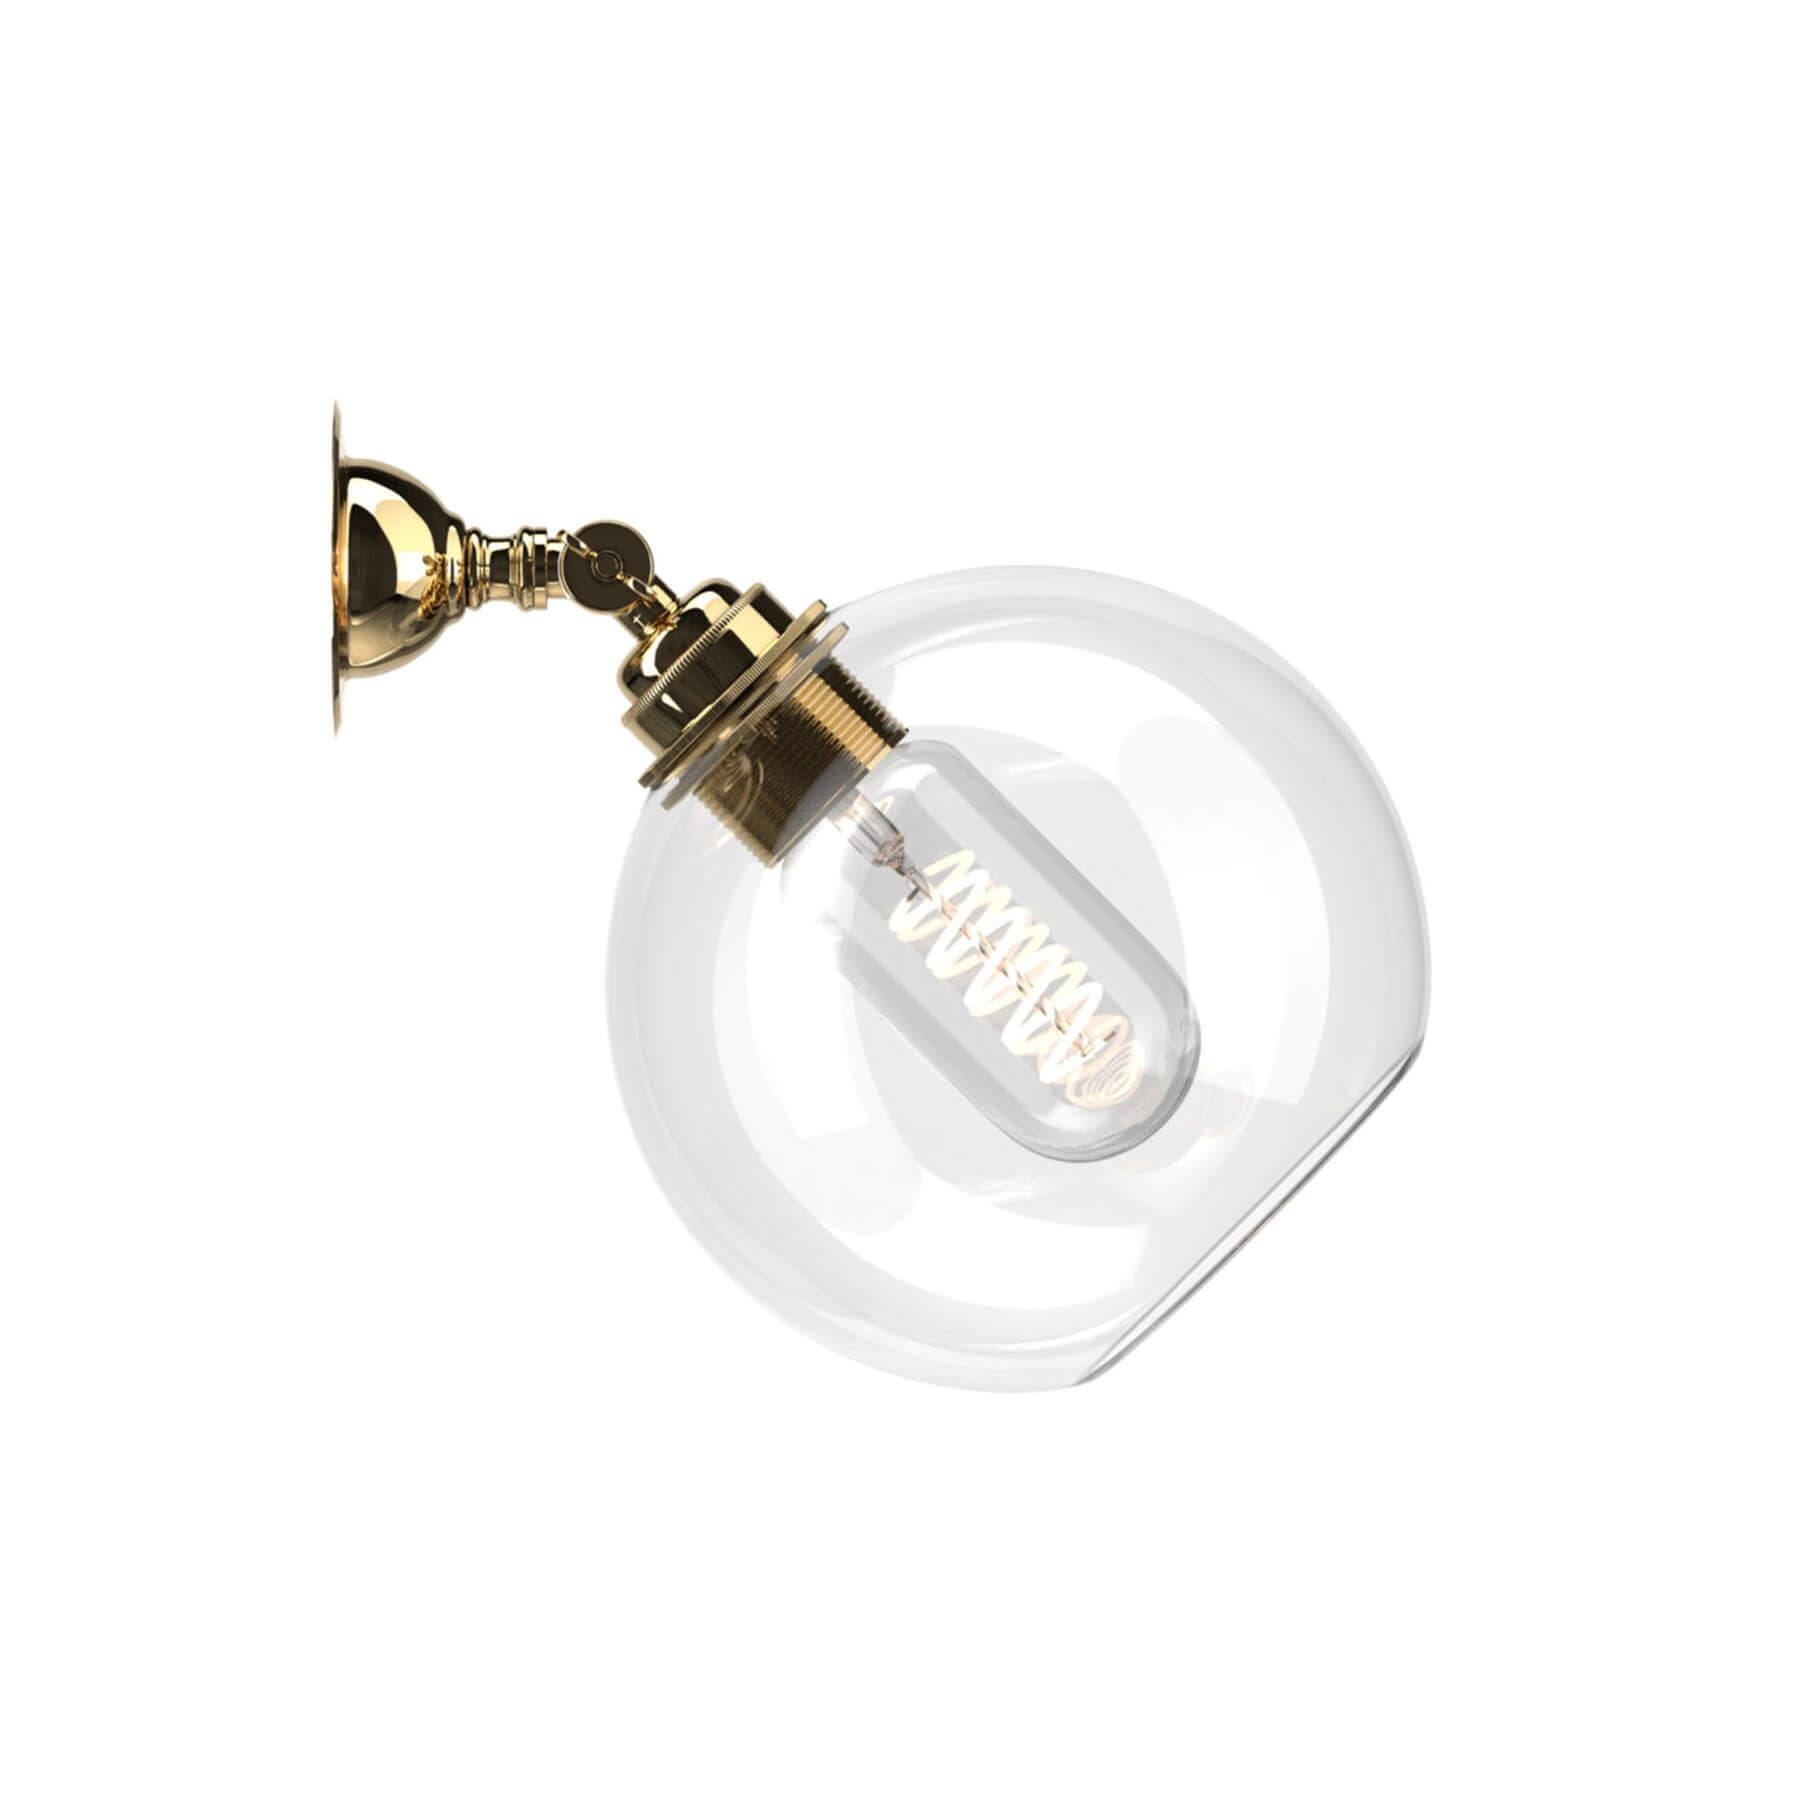 Fritz Fryer Hereford Adjustable Spotlight Clear Polished Brass Wall Lighting Clear